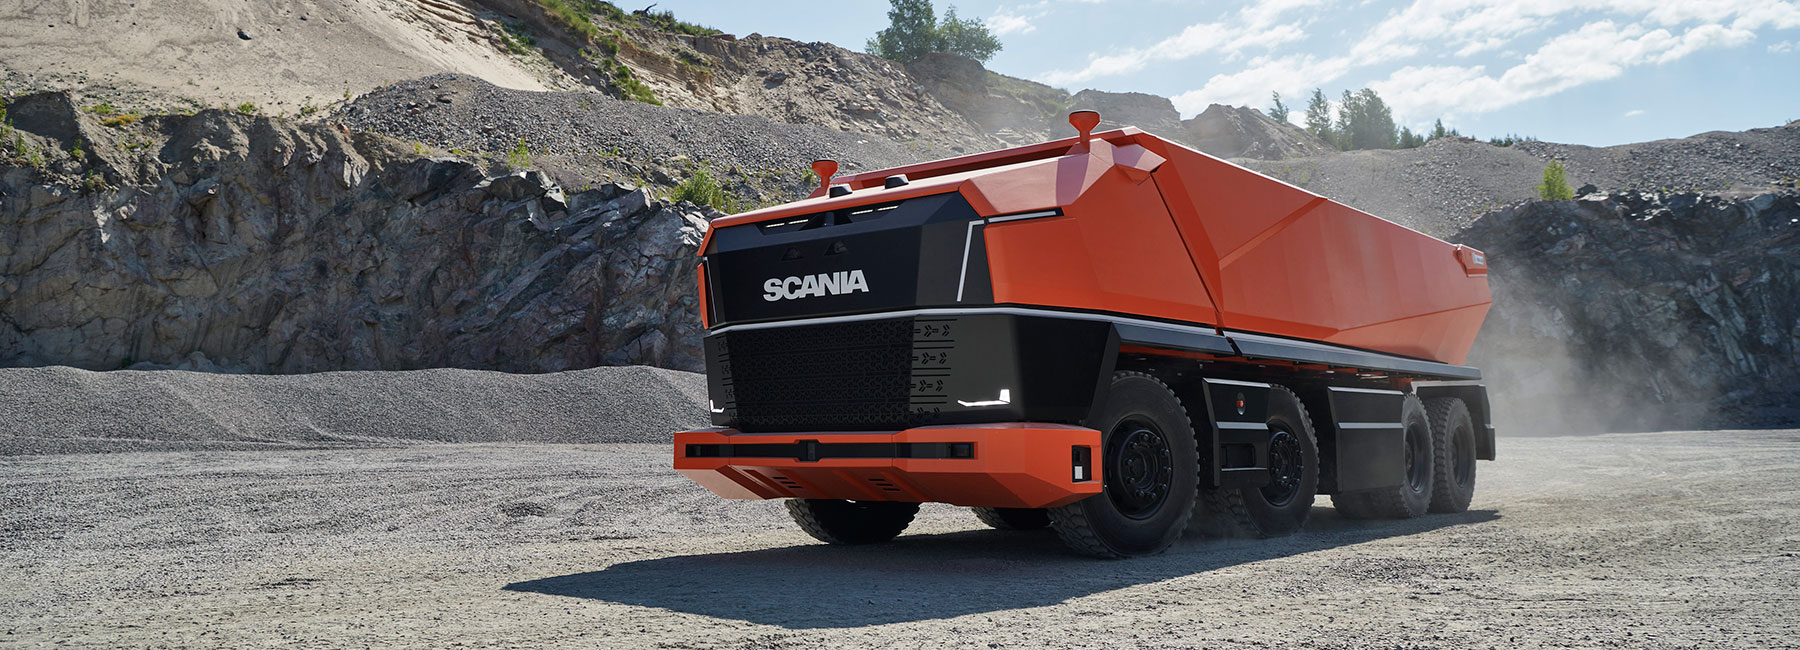 Scania Axl A Fully Autonomous Concept Truck Without A Cabin